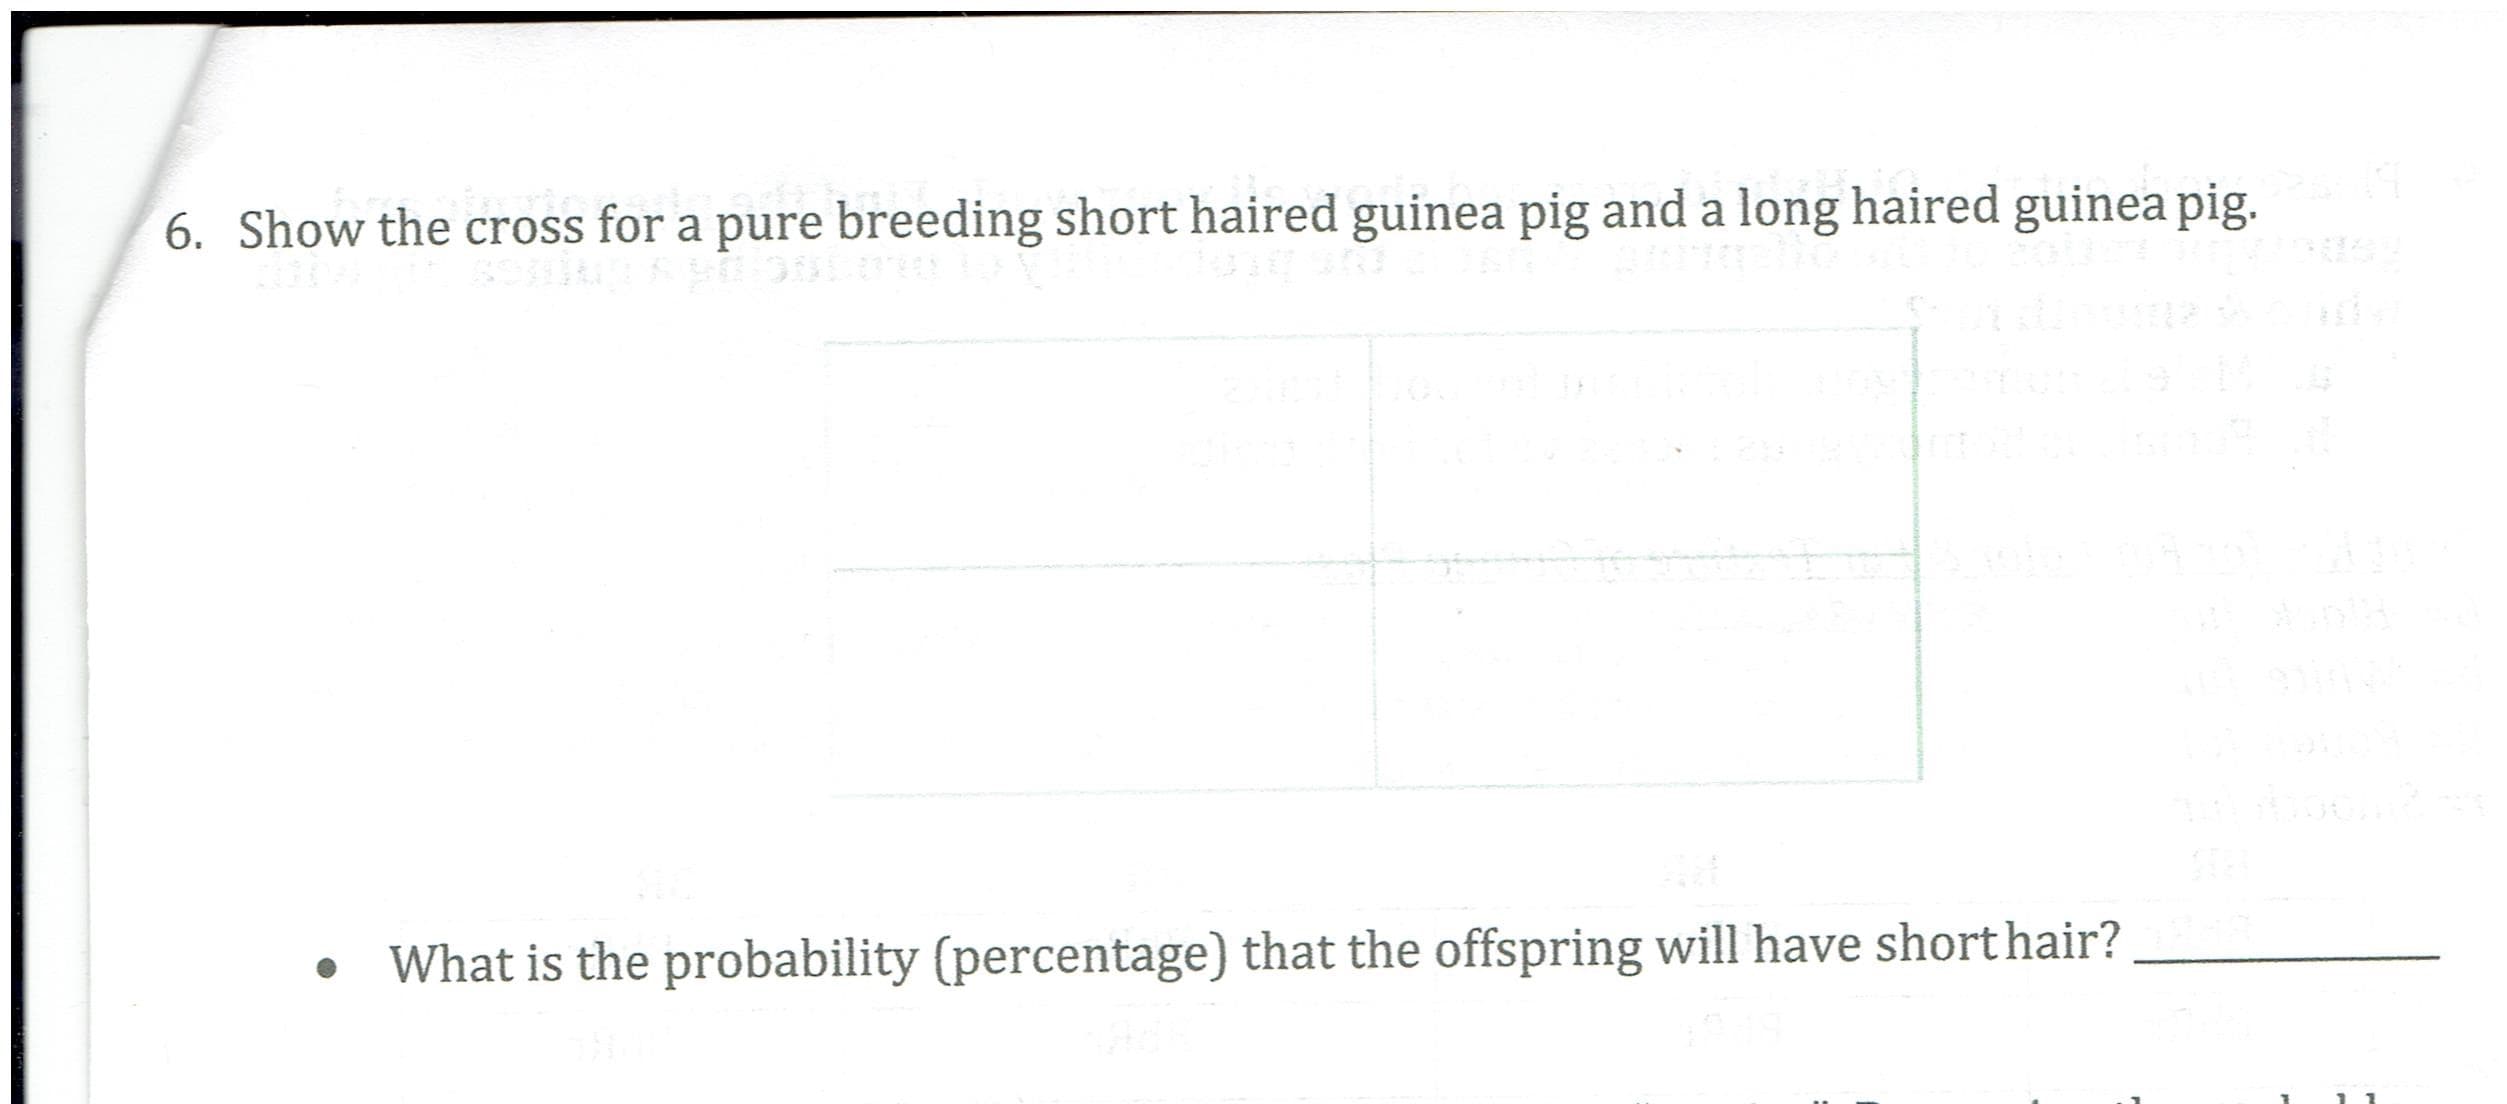 6. Show the cross for a pure breeding short haired guinea pig and a long haired guinea pig.
What is the probability (percentage) that the offspring will have shorthair?
